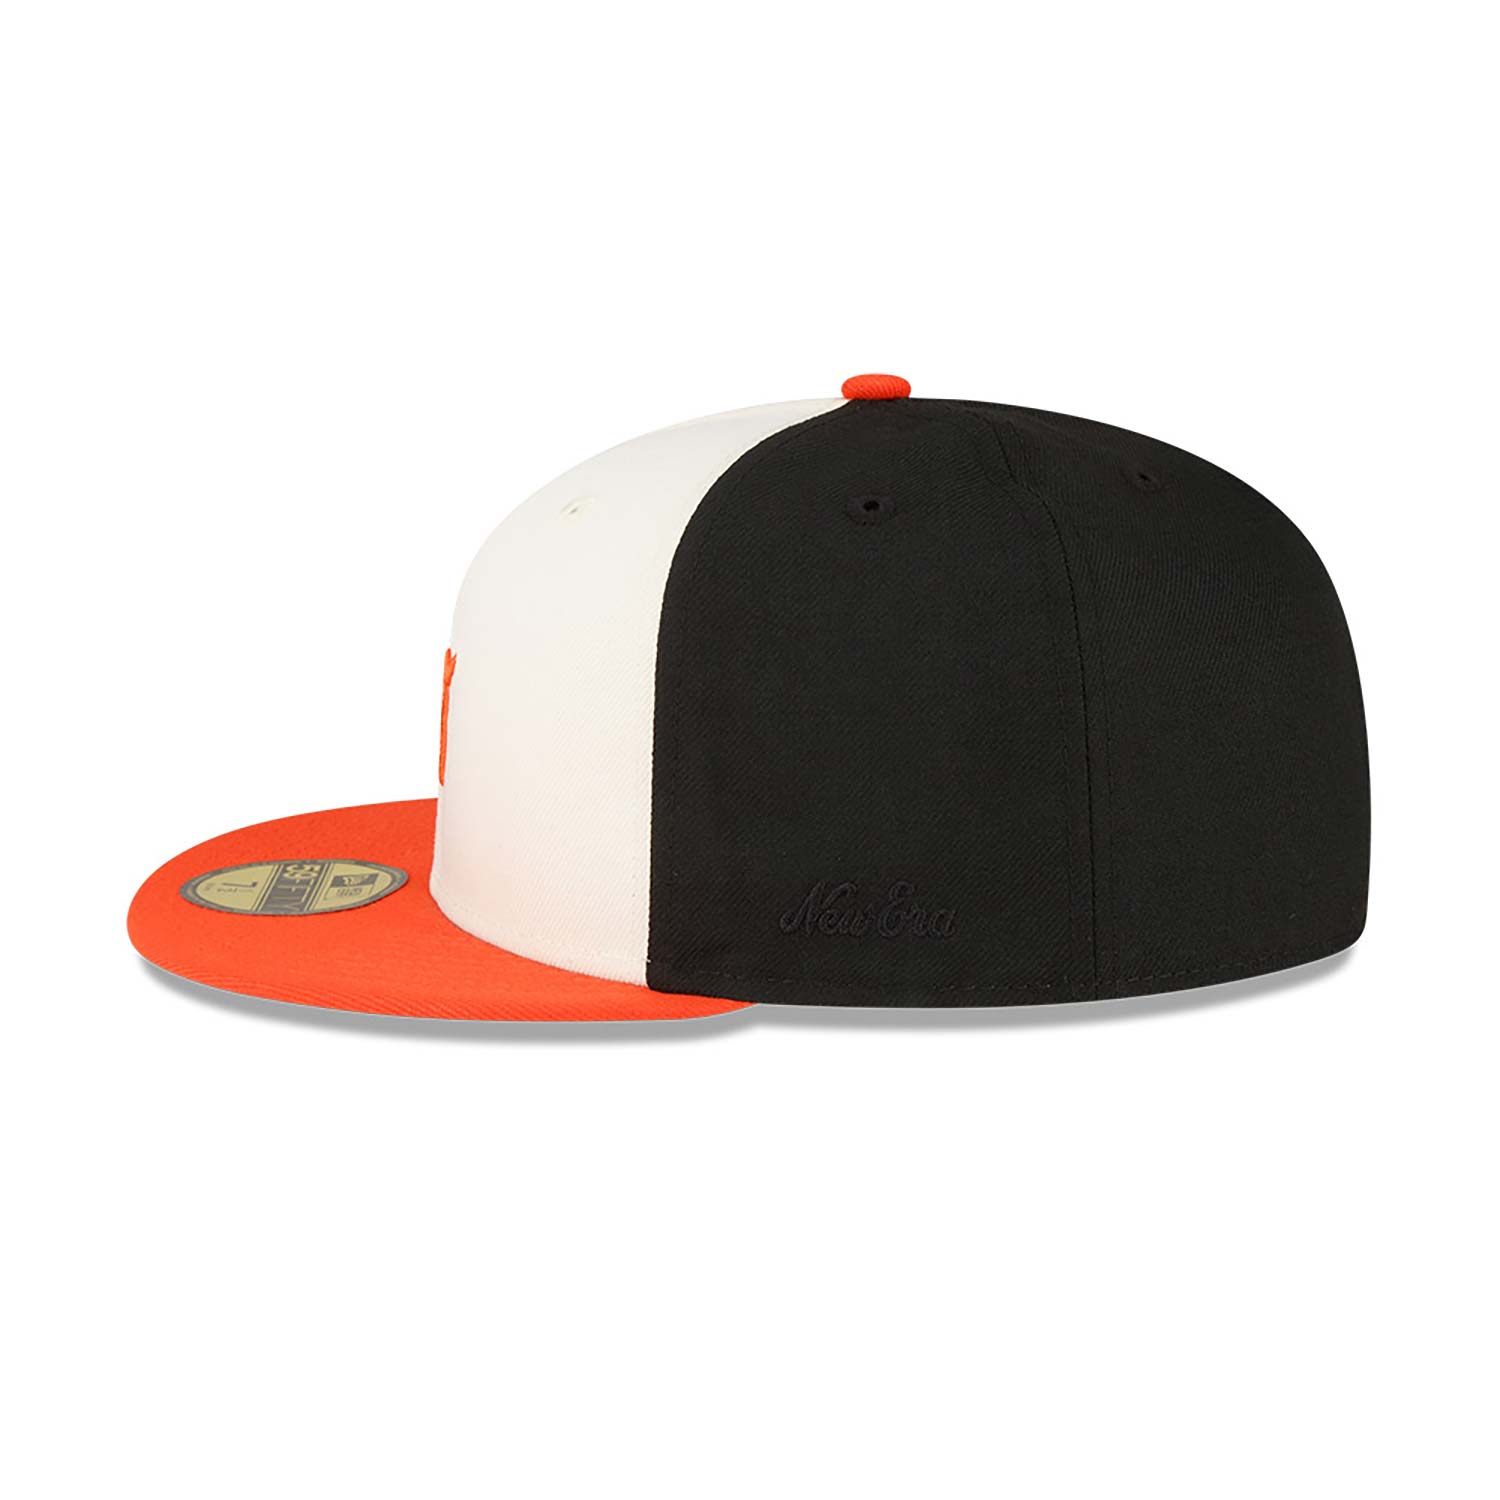 Fear Of God Baltimore Orioles White 59FIFTY Fitted Cap